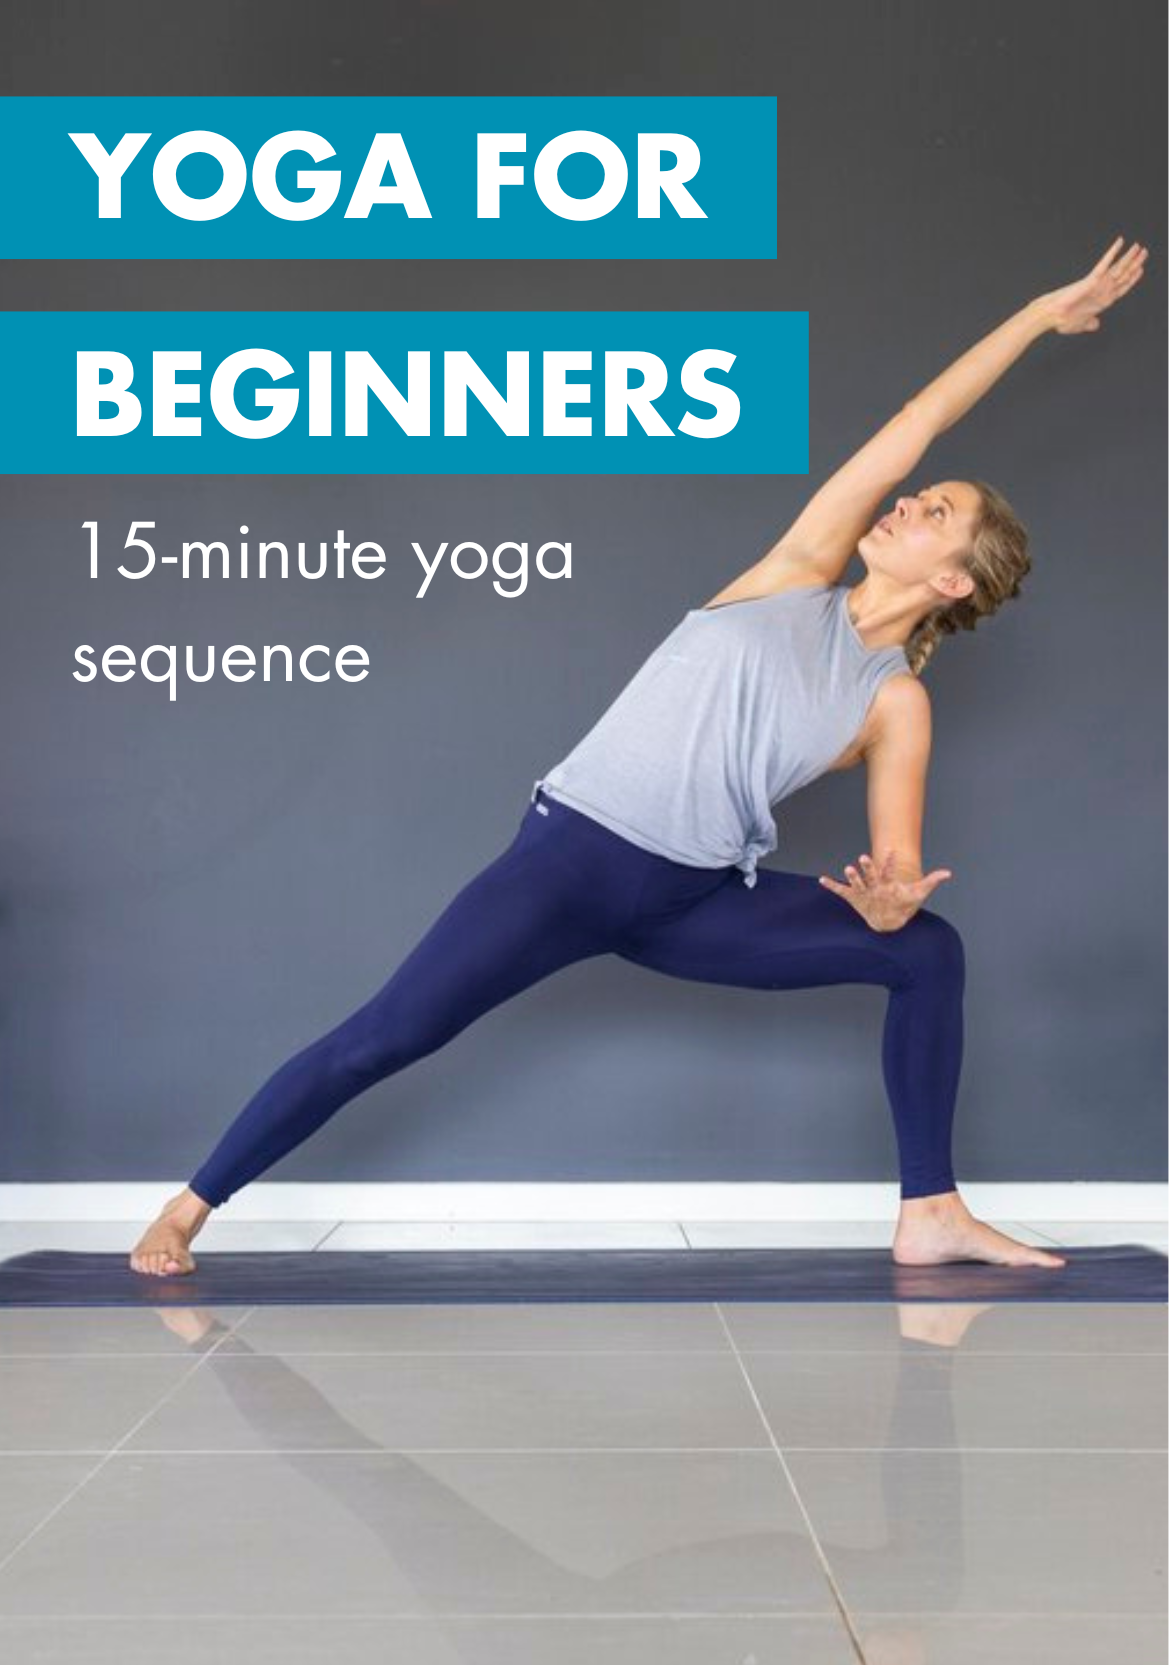 Yoga sequence for beginners